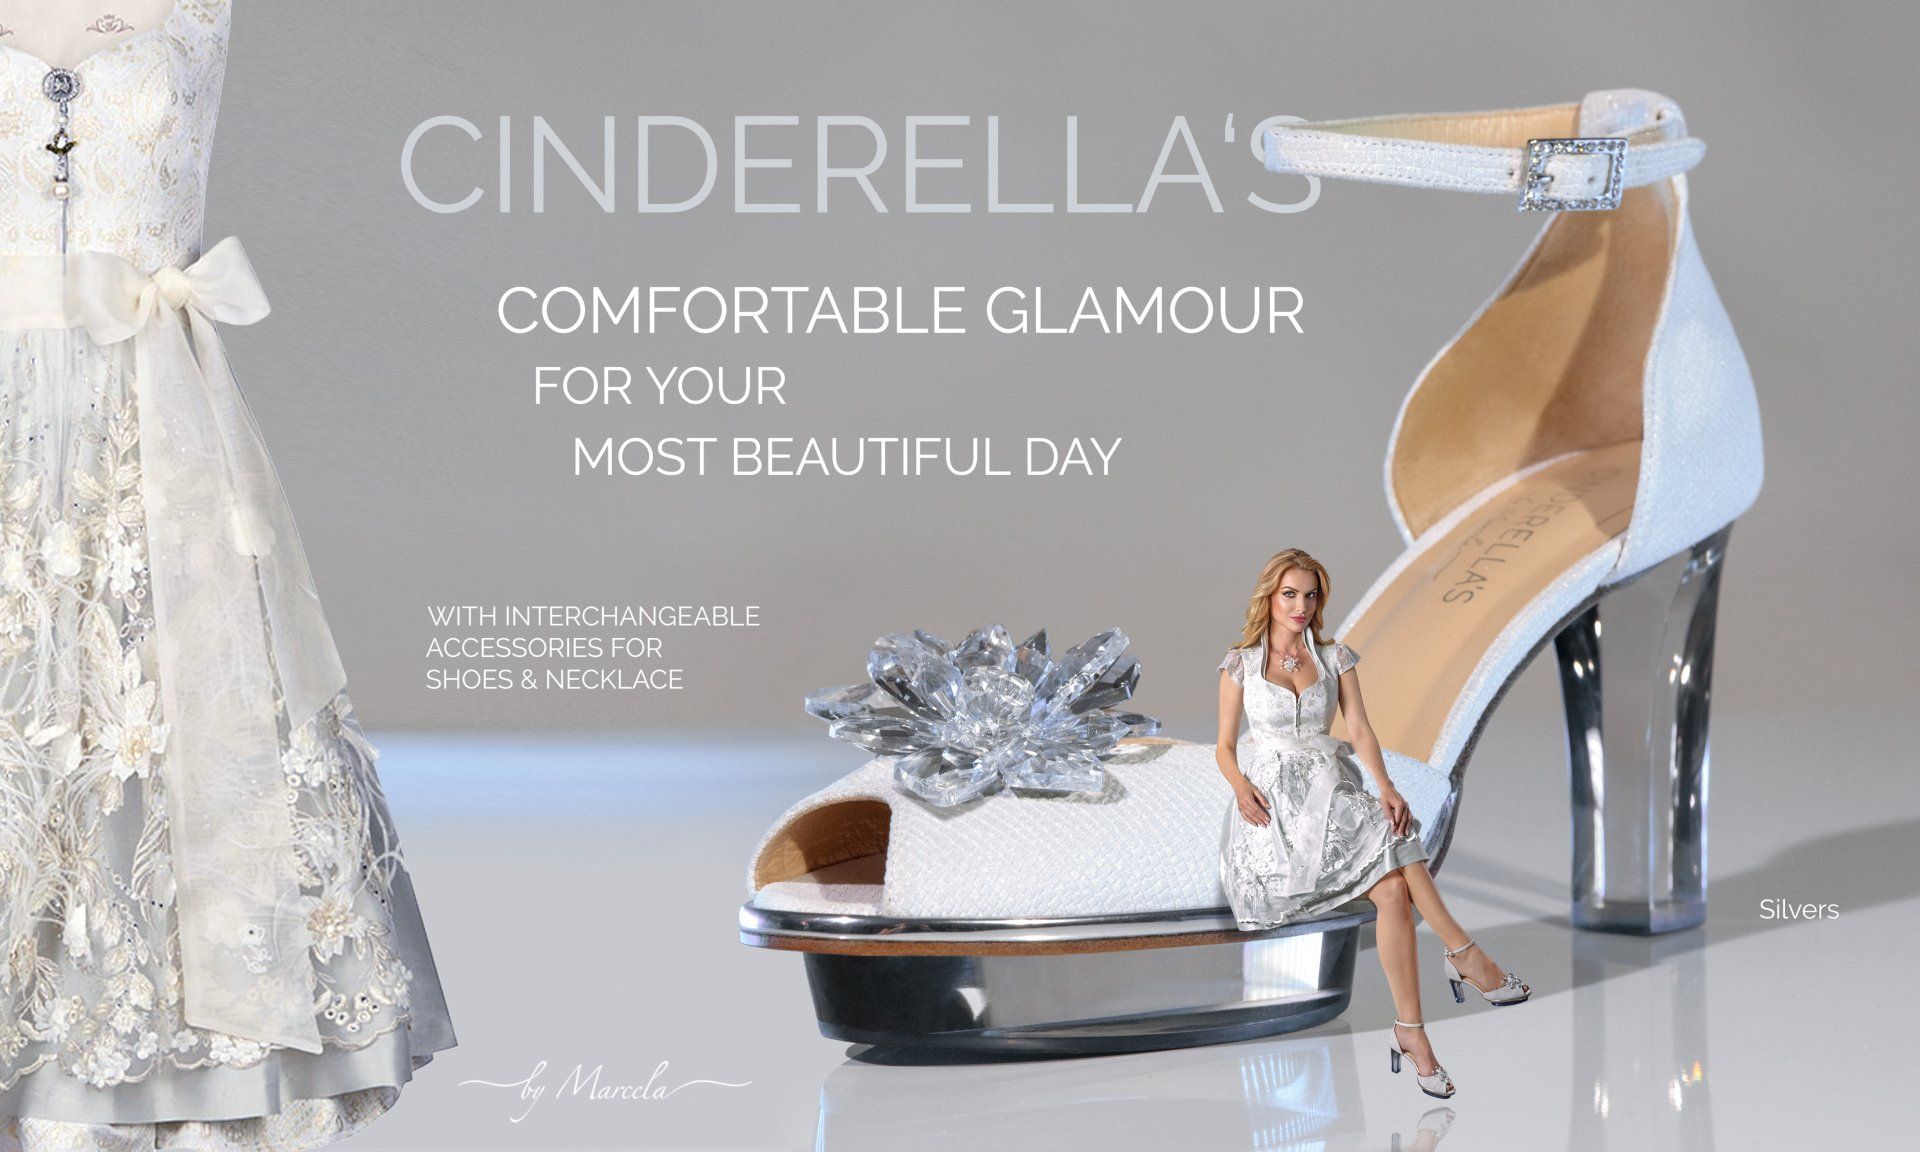 Cinderellas by Marcela, Cinderellas Shoes, Dirndl shoes for wedding with transparent high heel called Silvers